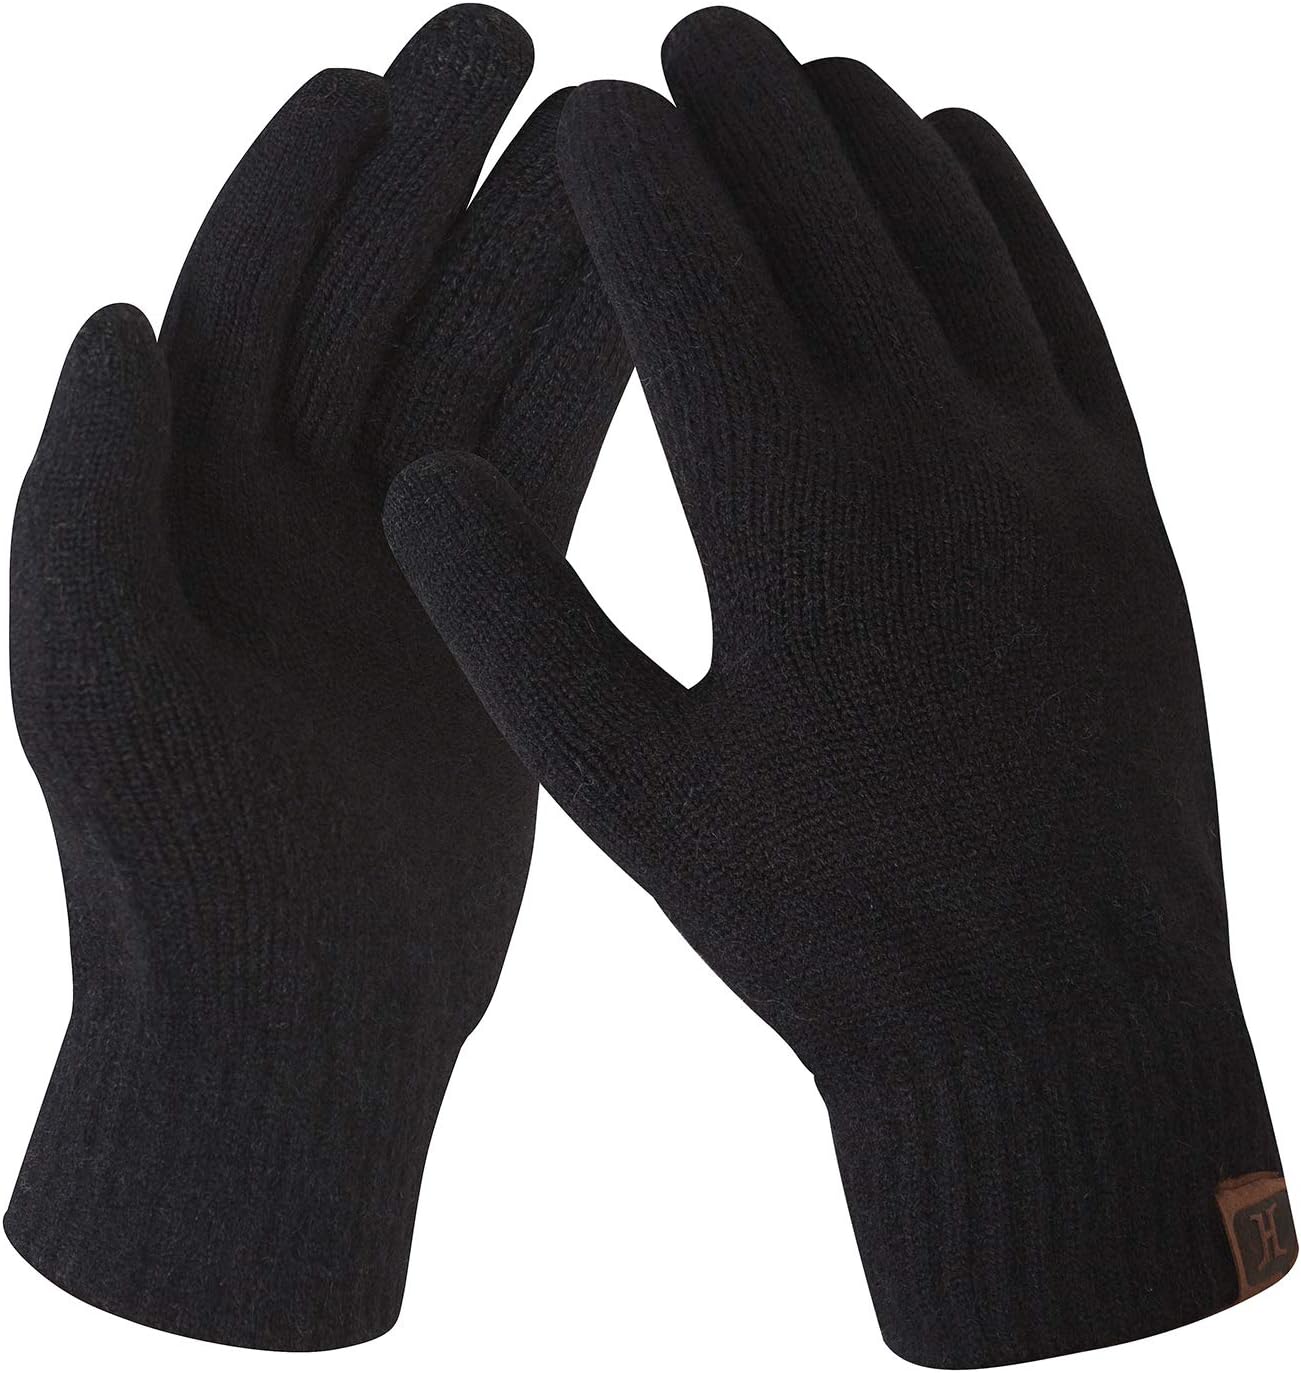 Limited-Time Offer! FZ FANTASTIC ZONE Women's Winter Touchscreen Wool Magic Gloves - Up to 31% Off!